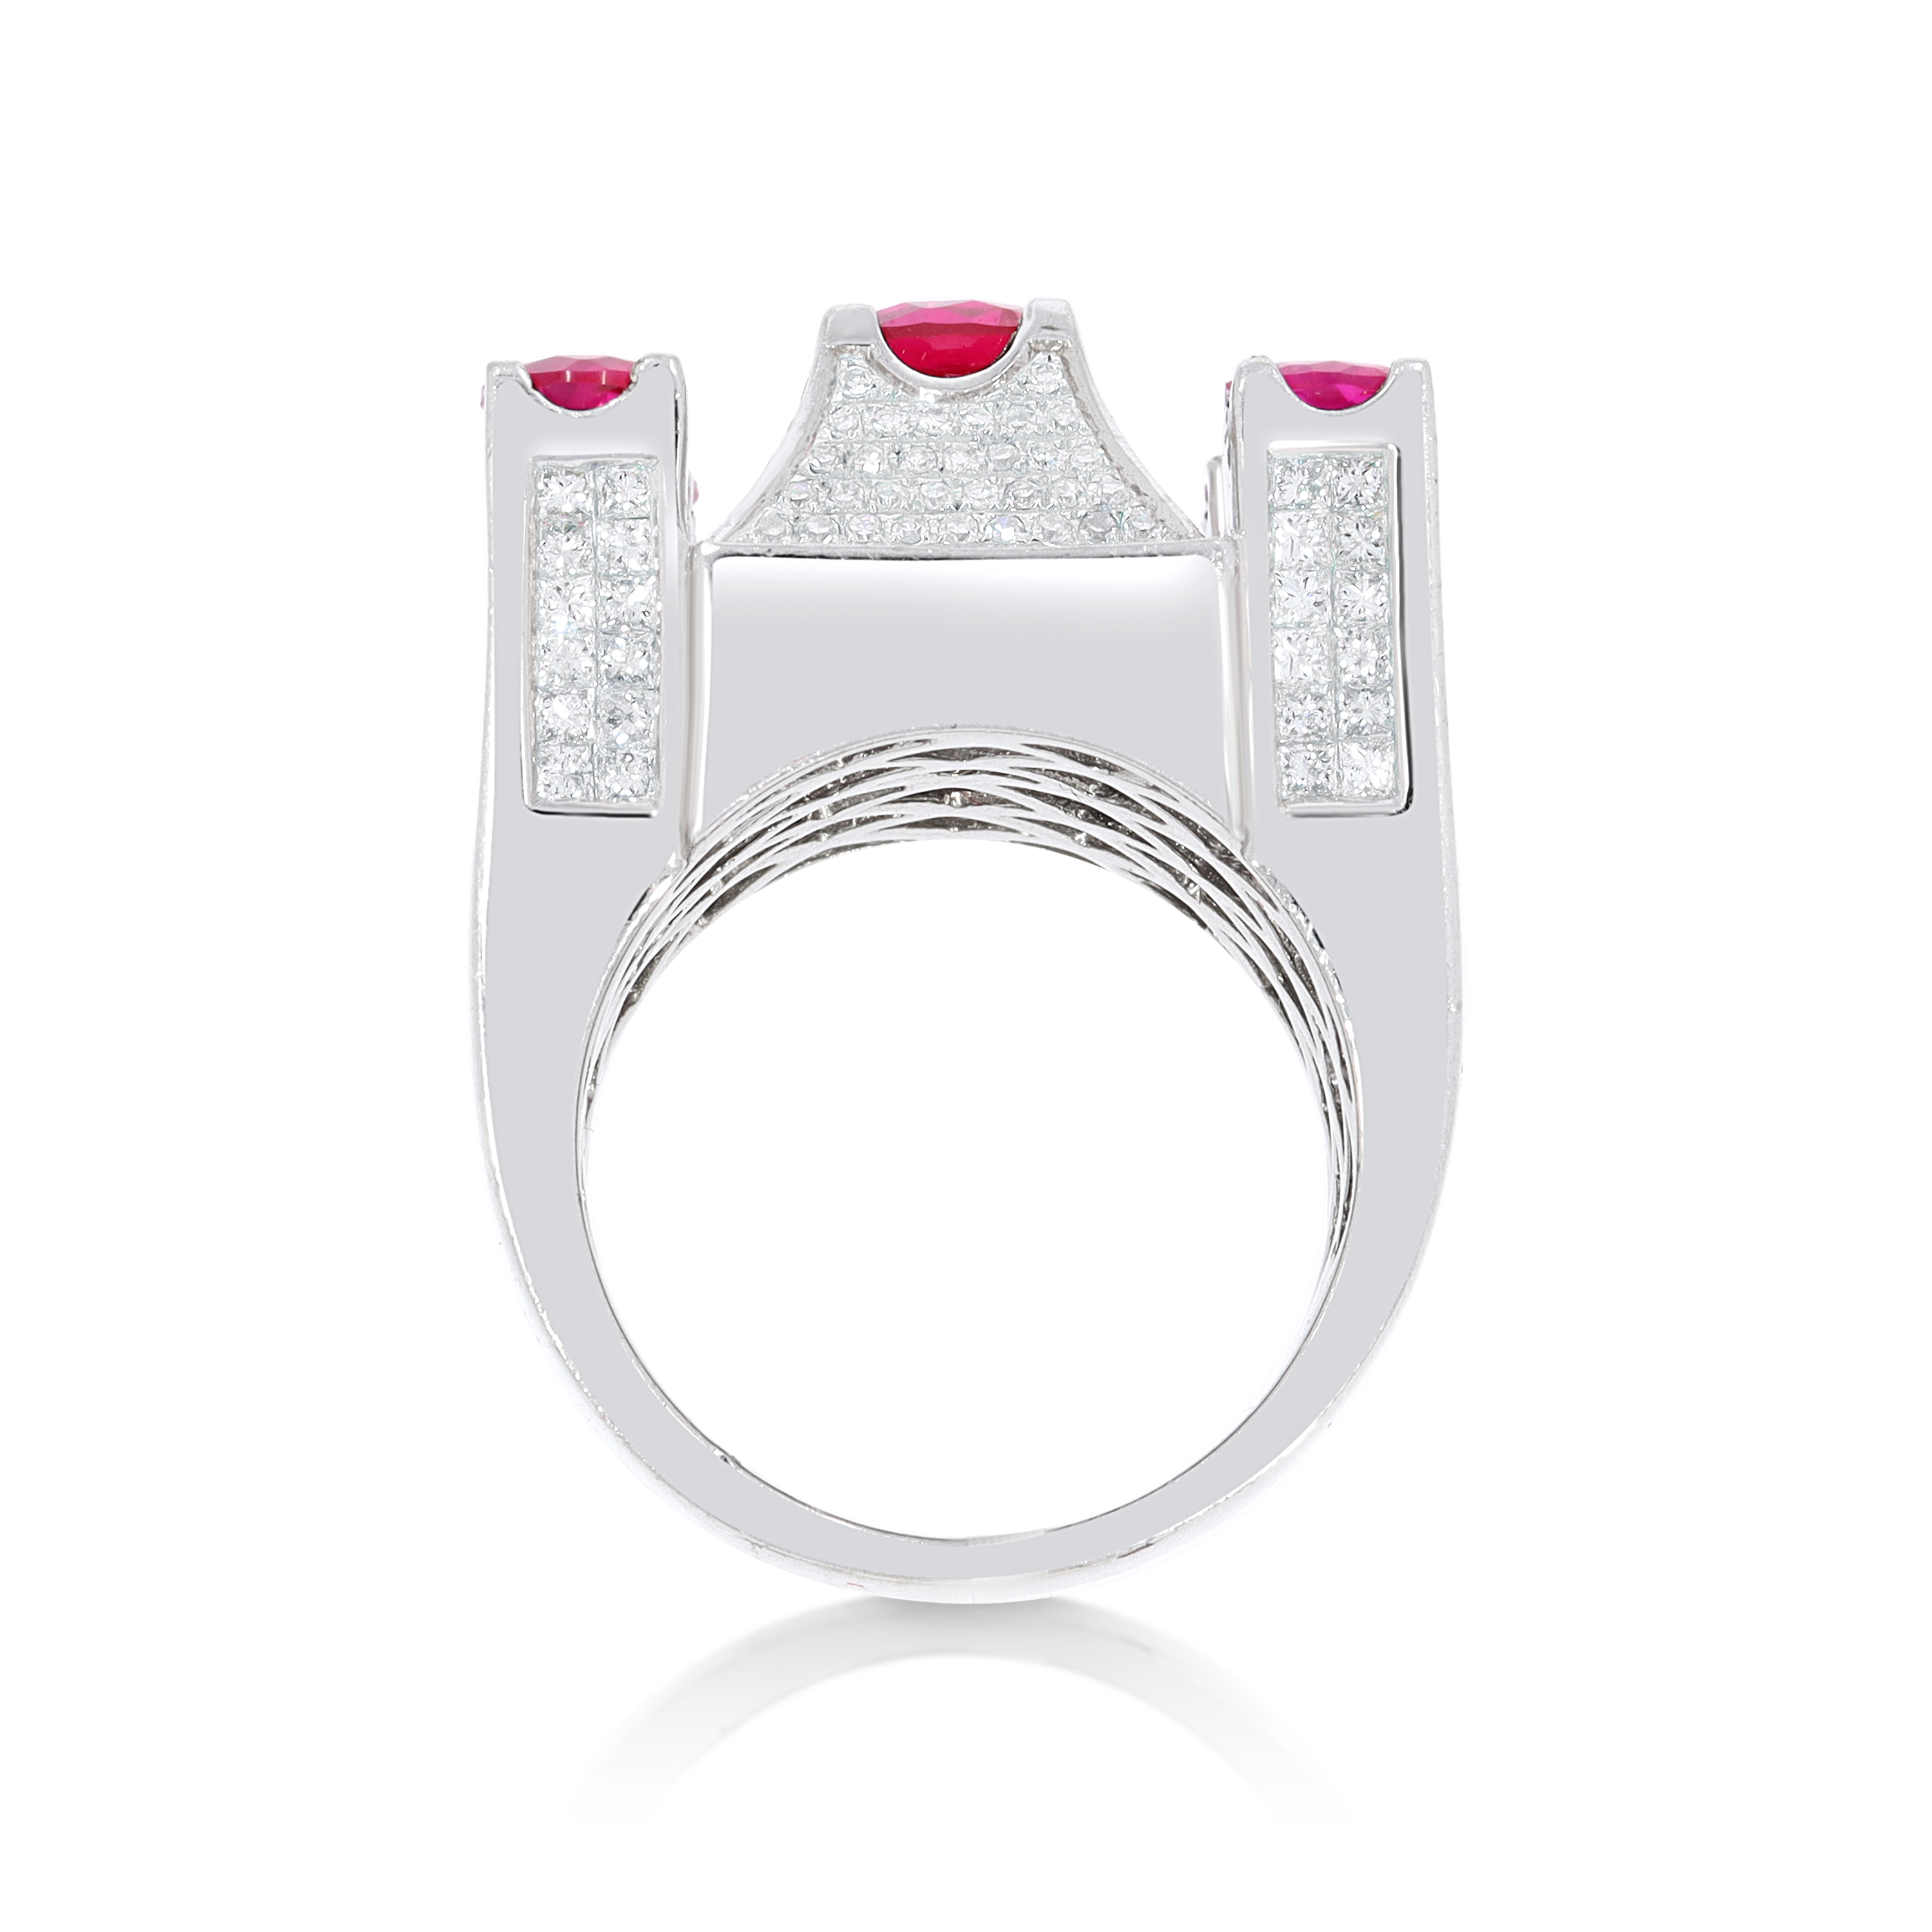 Diamond and Ruby Ring  8.36 ct. 14K White Gold